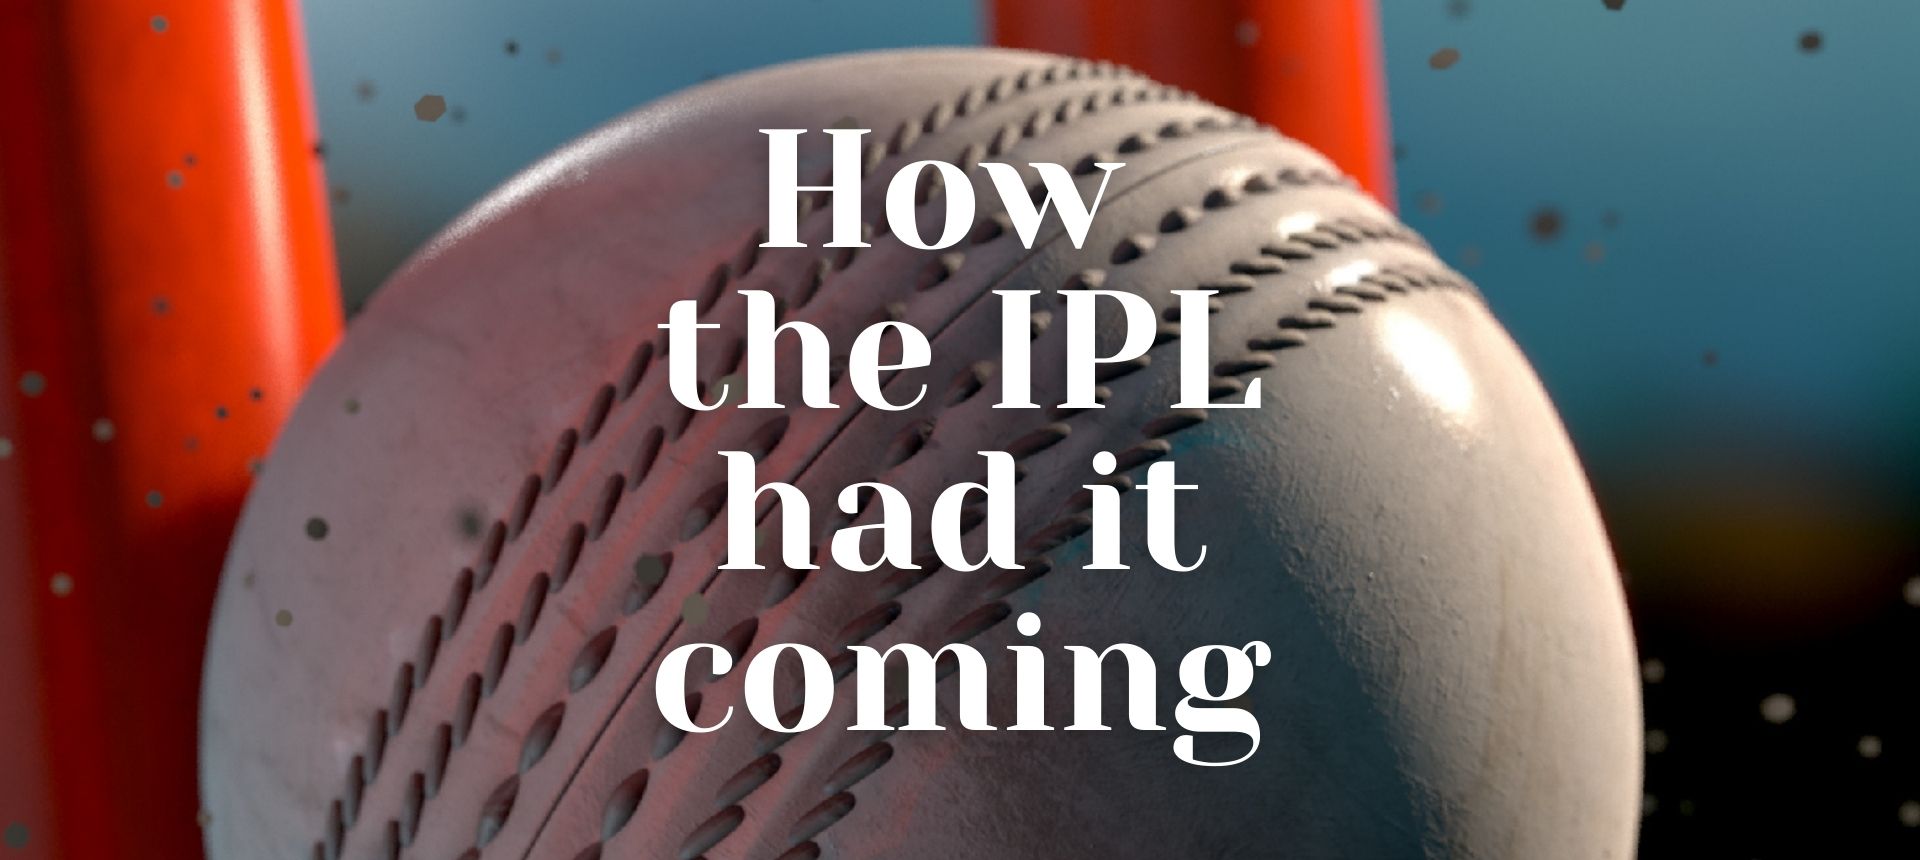 RED LAB: How the IPL had it coming